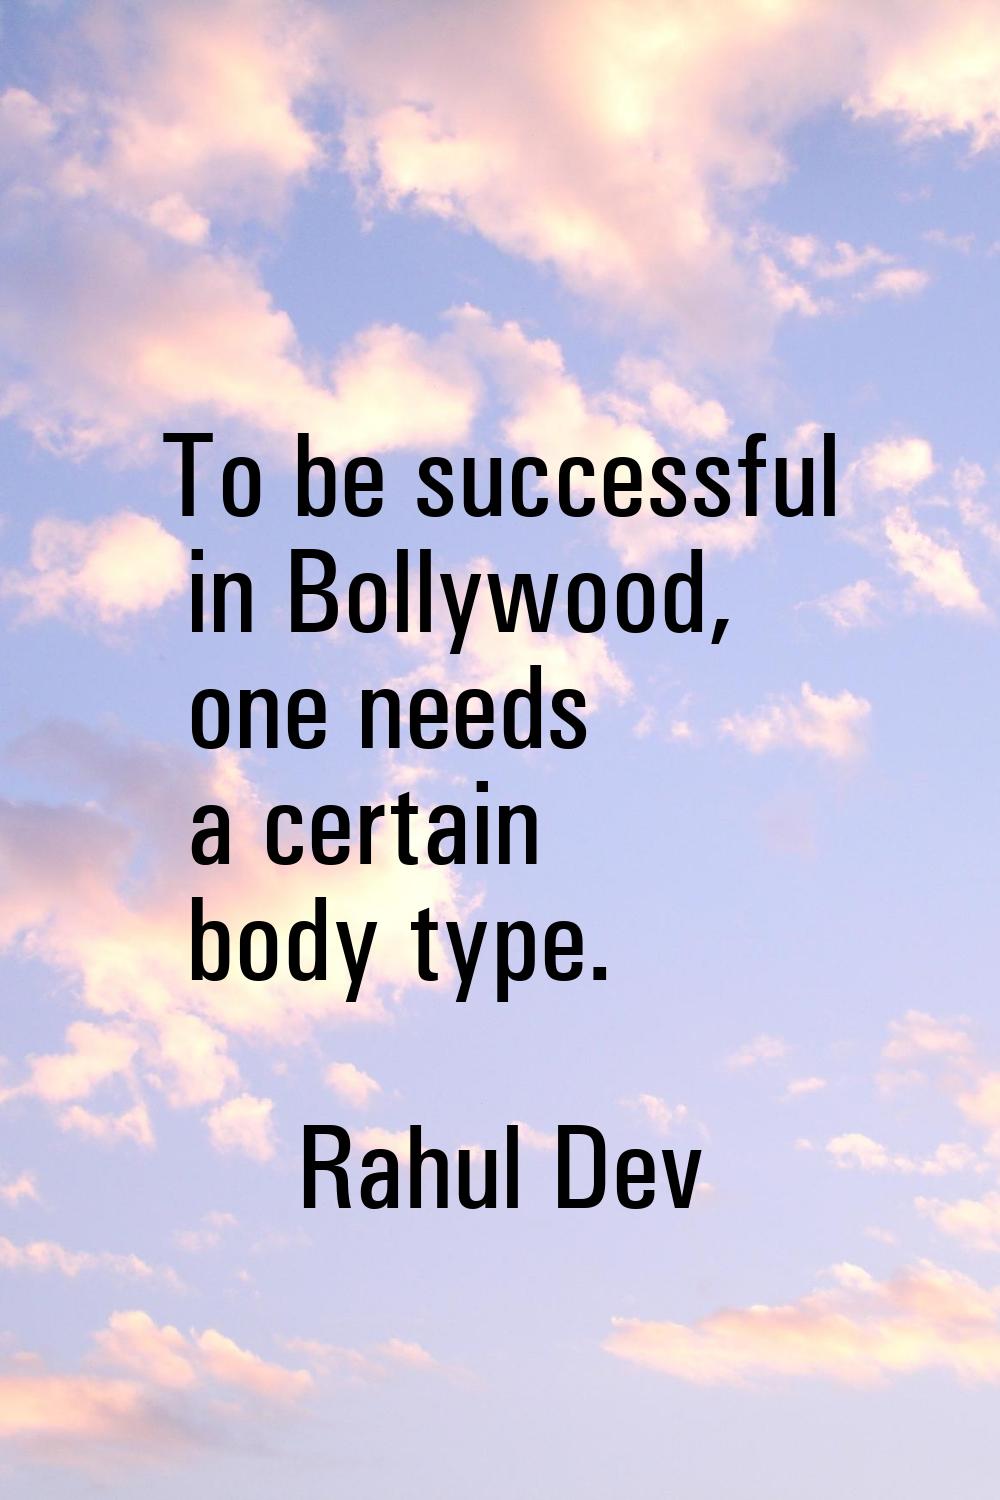 To be successful in Bollywood, one needs a certain body type.